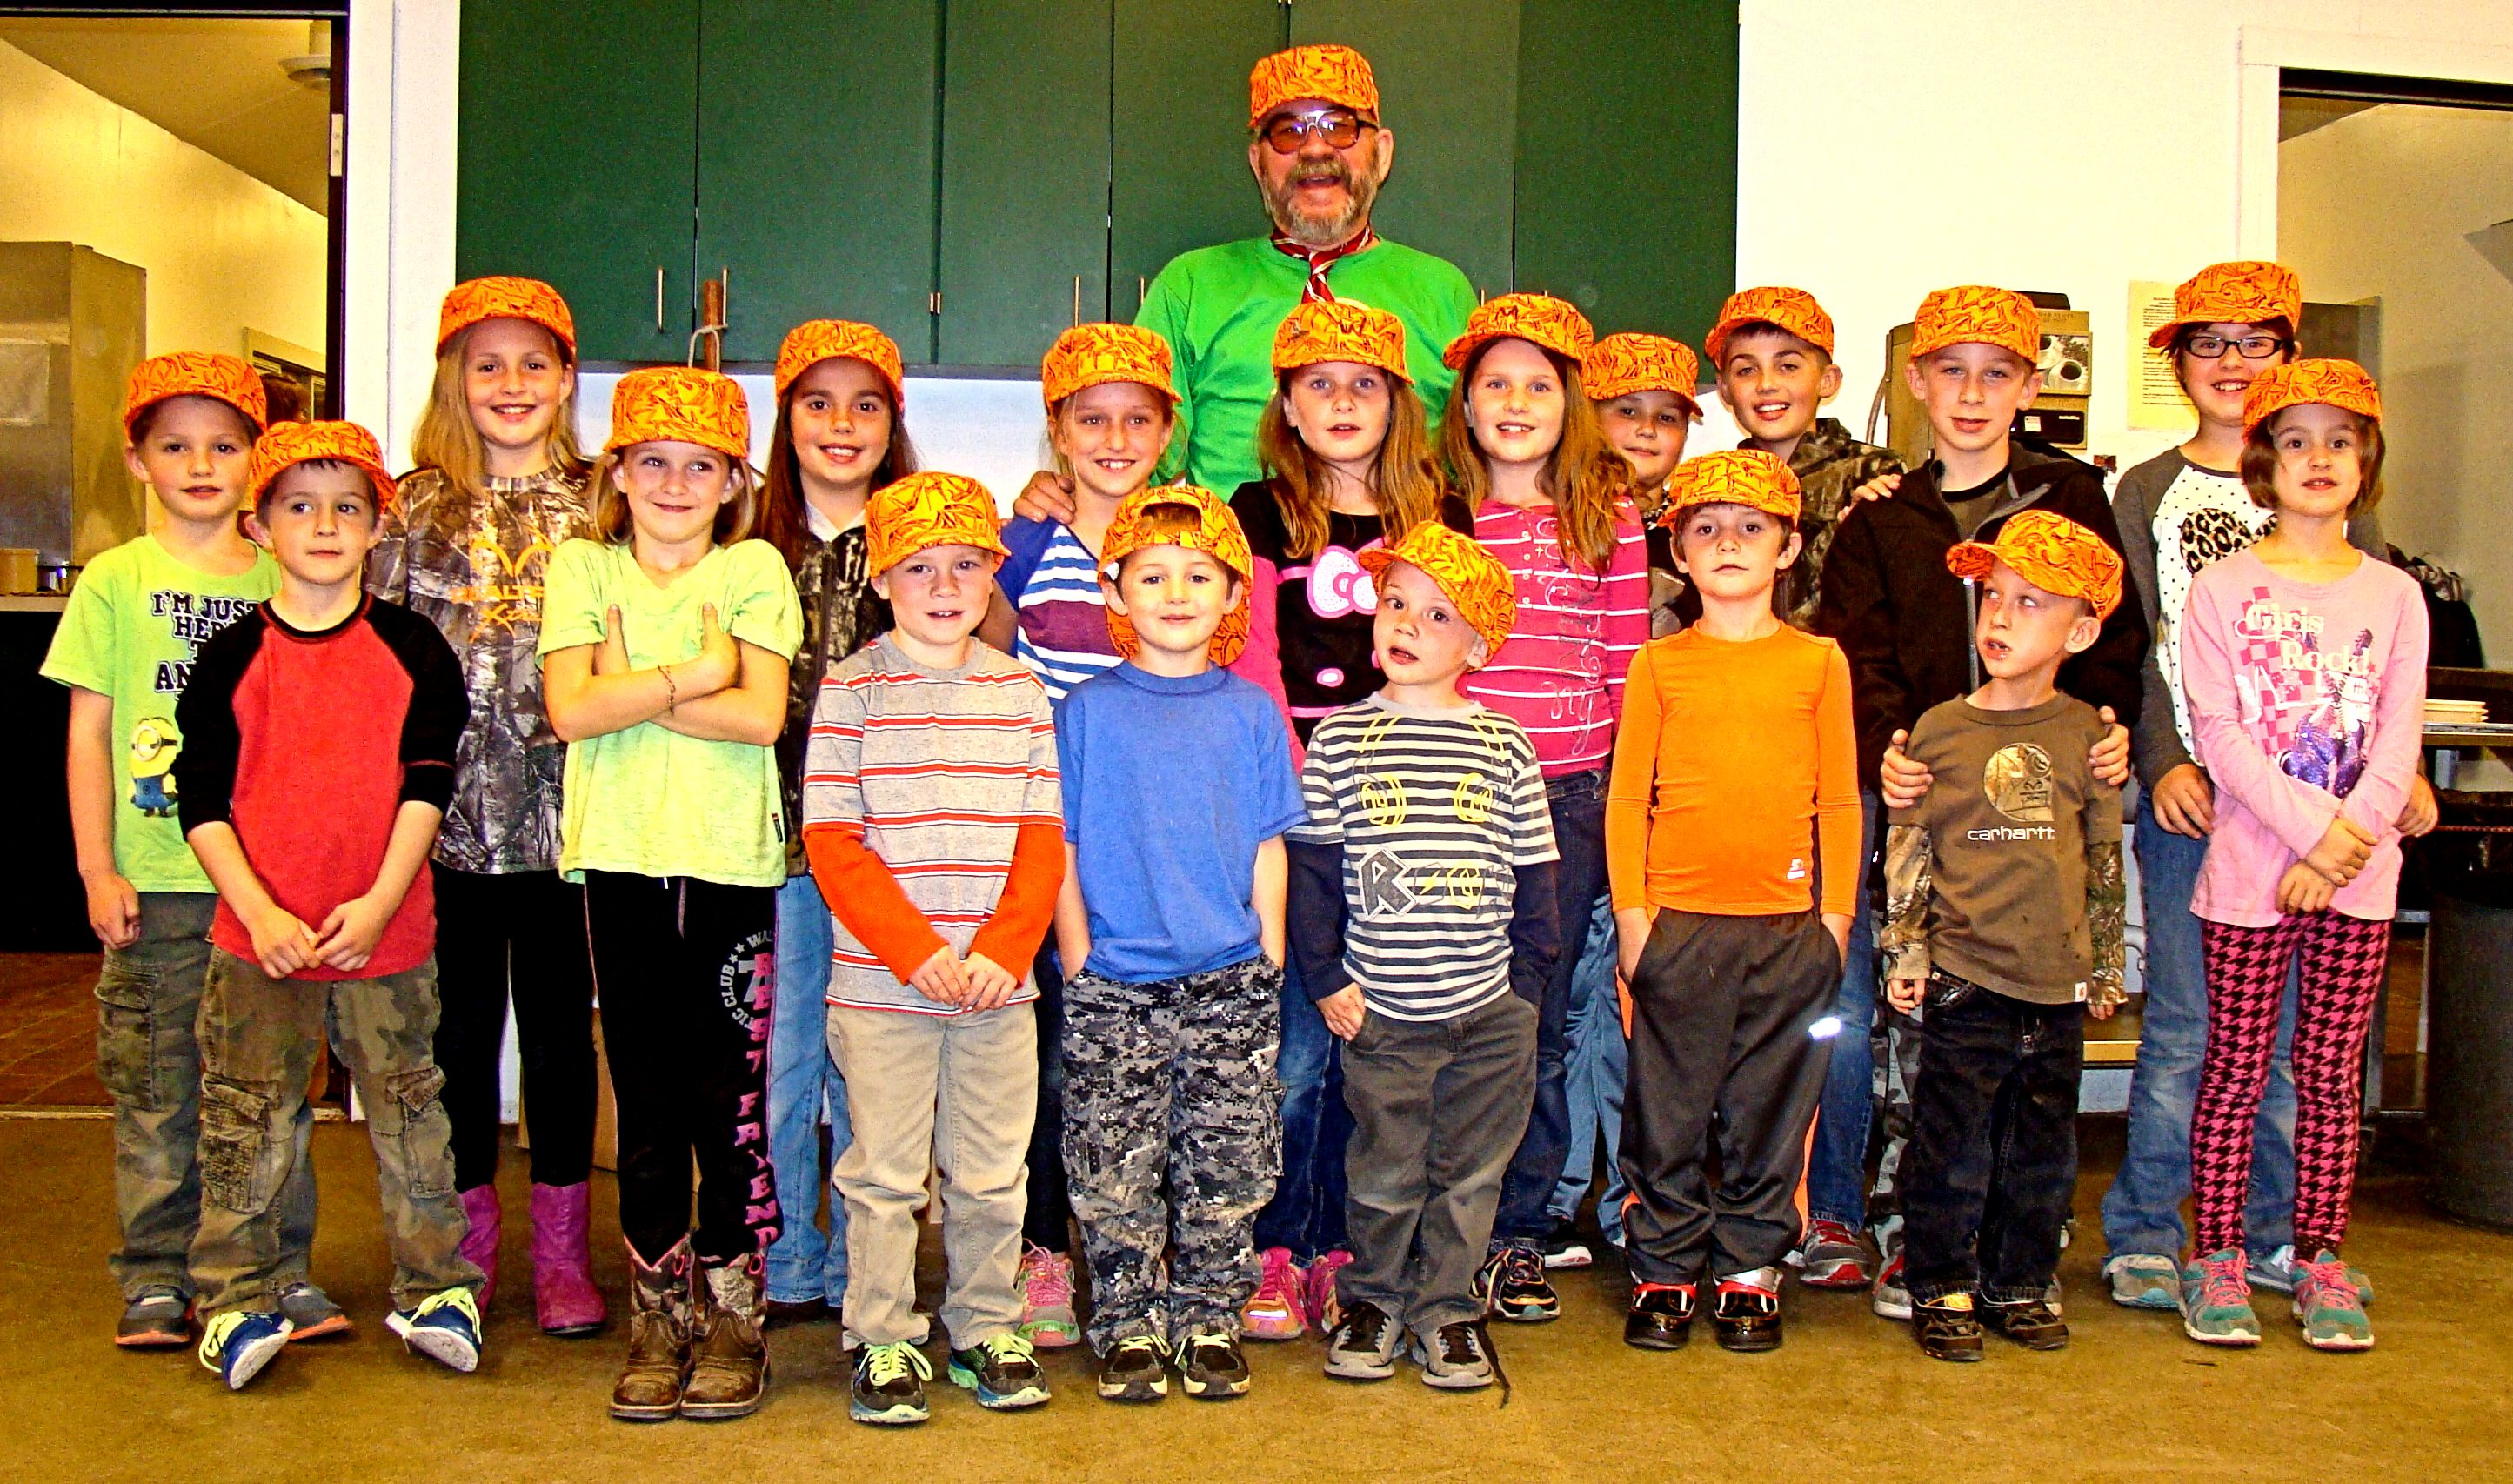 Here is one good looking bunch or the "Little People" who attended this year's UFFDA Hunt wearing their special UFFDA hats and surrounding the biggest kid at the hunt.